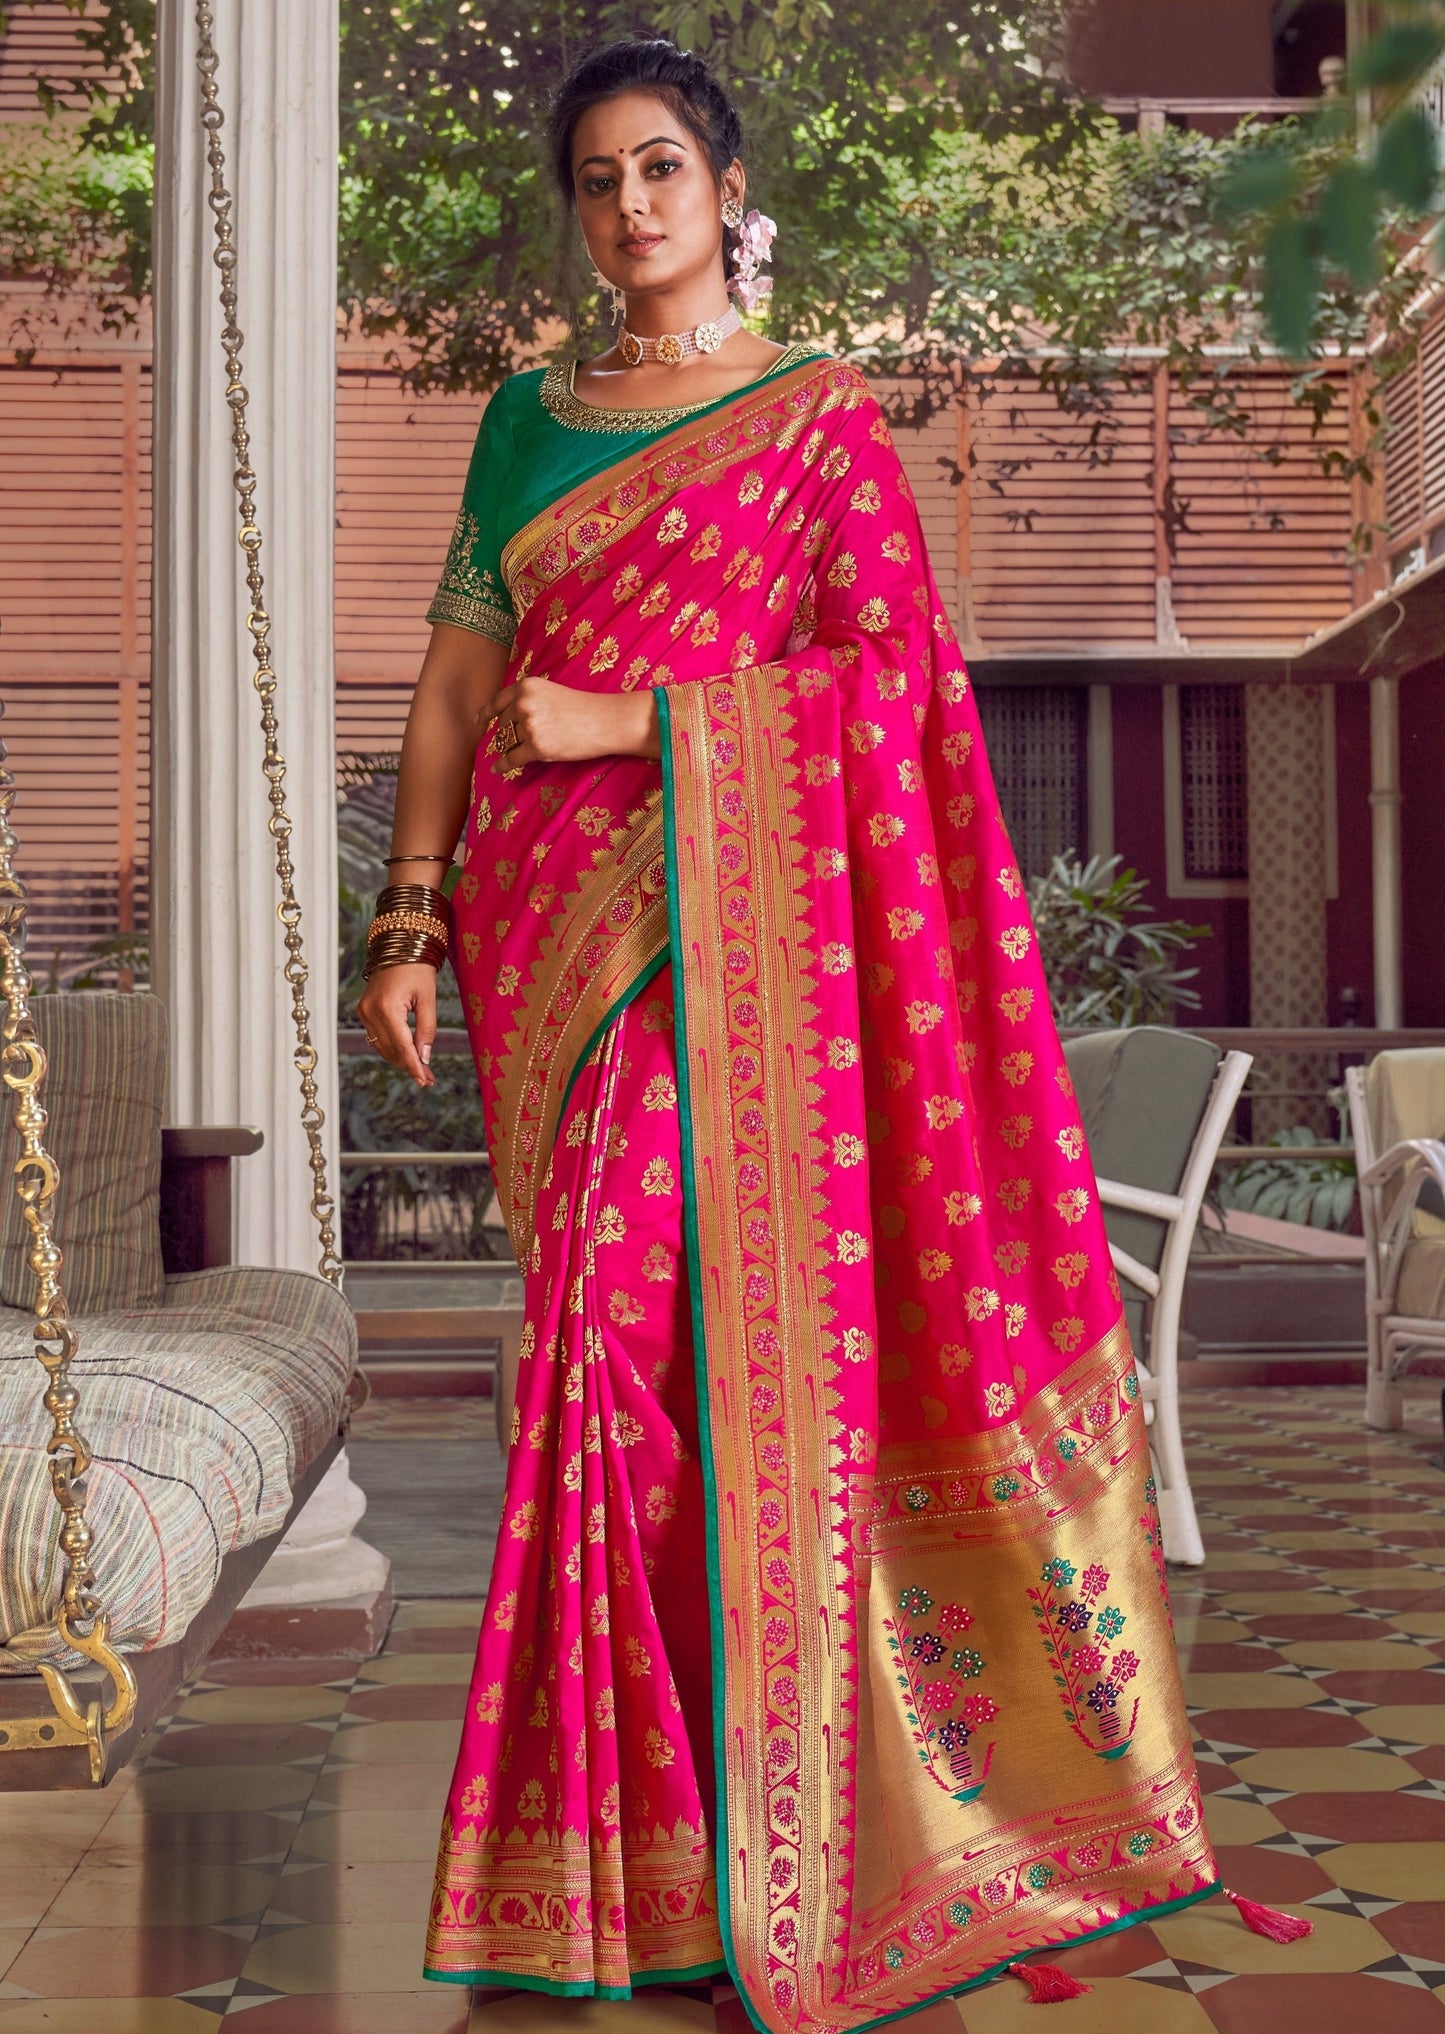 Pink paithani silk saree with contrast green blouse online shopping designs.